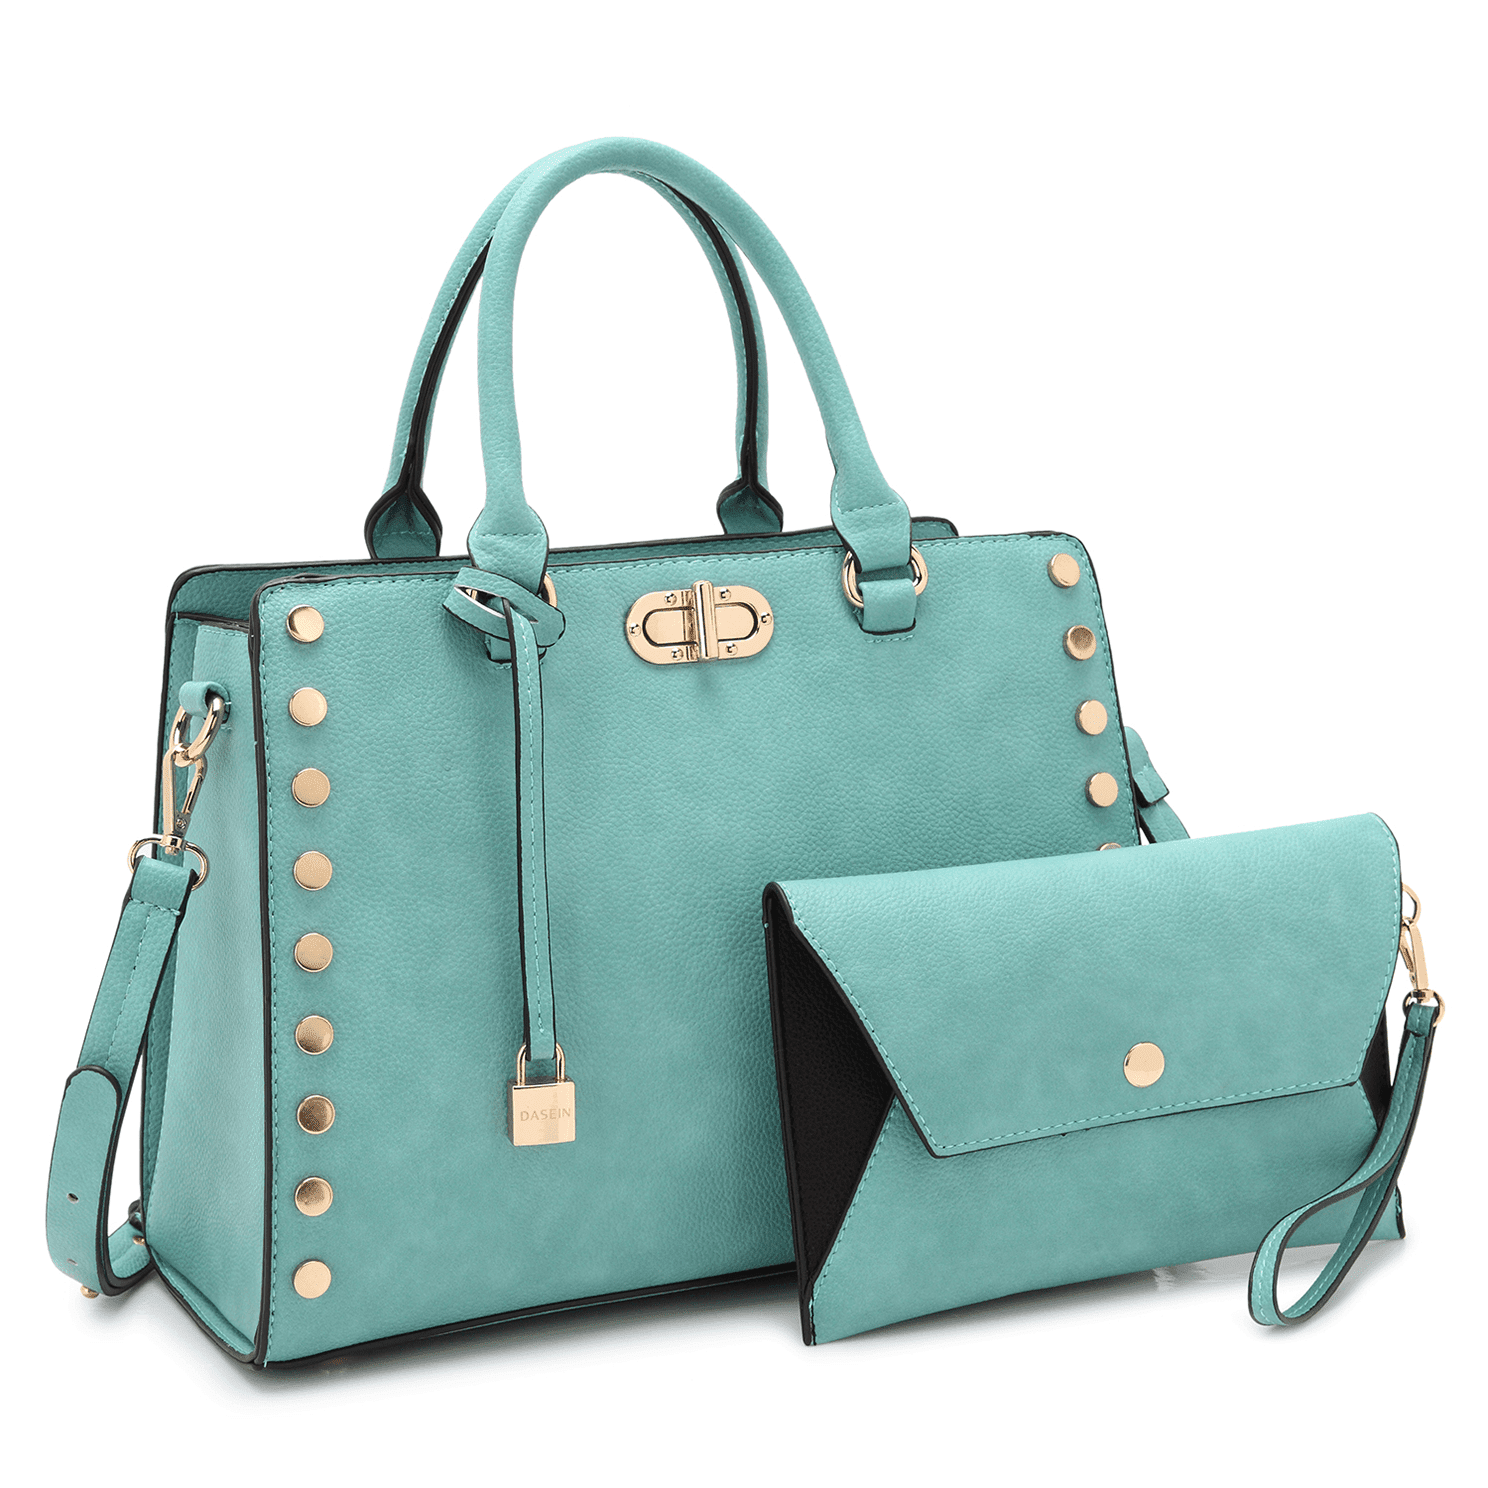 Zipper Tote Bag Texture Wrapping Paper Sheep Lambs Rush Green Leather Hand Totes Bag Causal Handbags Zipped Shoulder Organizer For Lady Girls Womens Medium Shoulder Bag For Women